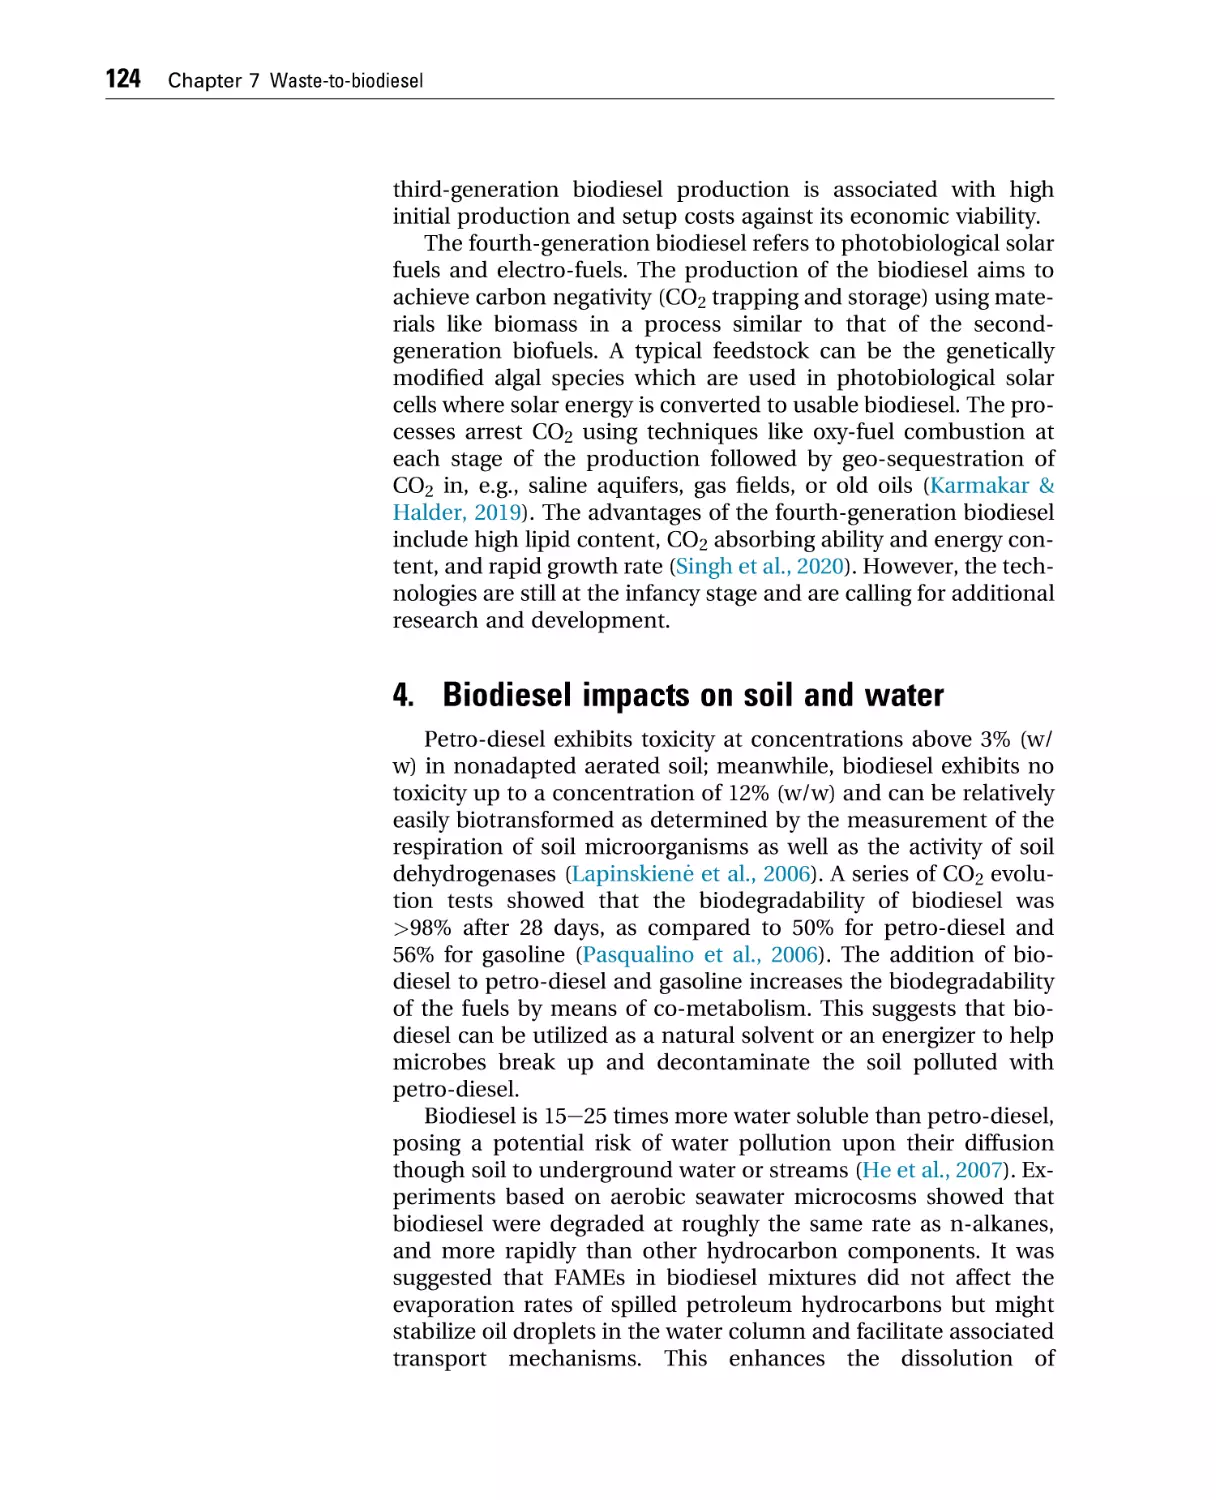 4. Biodiesel impacts on soil and water